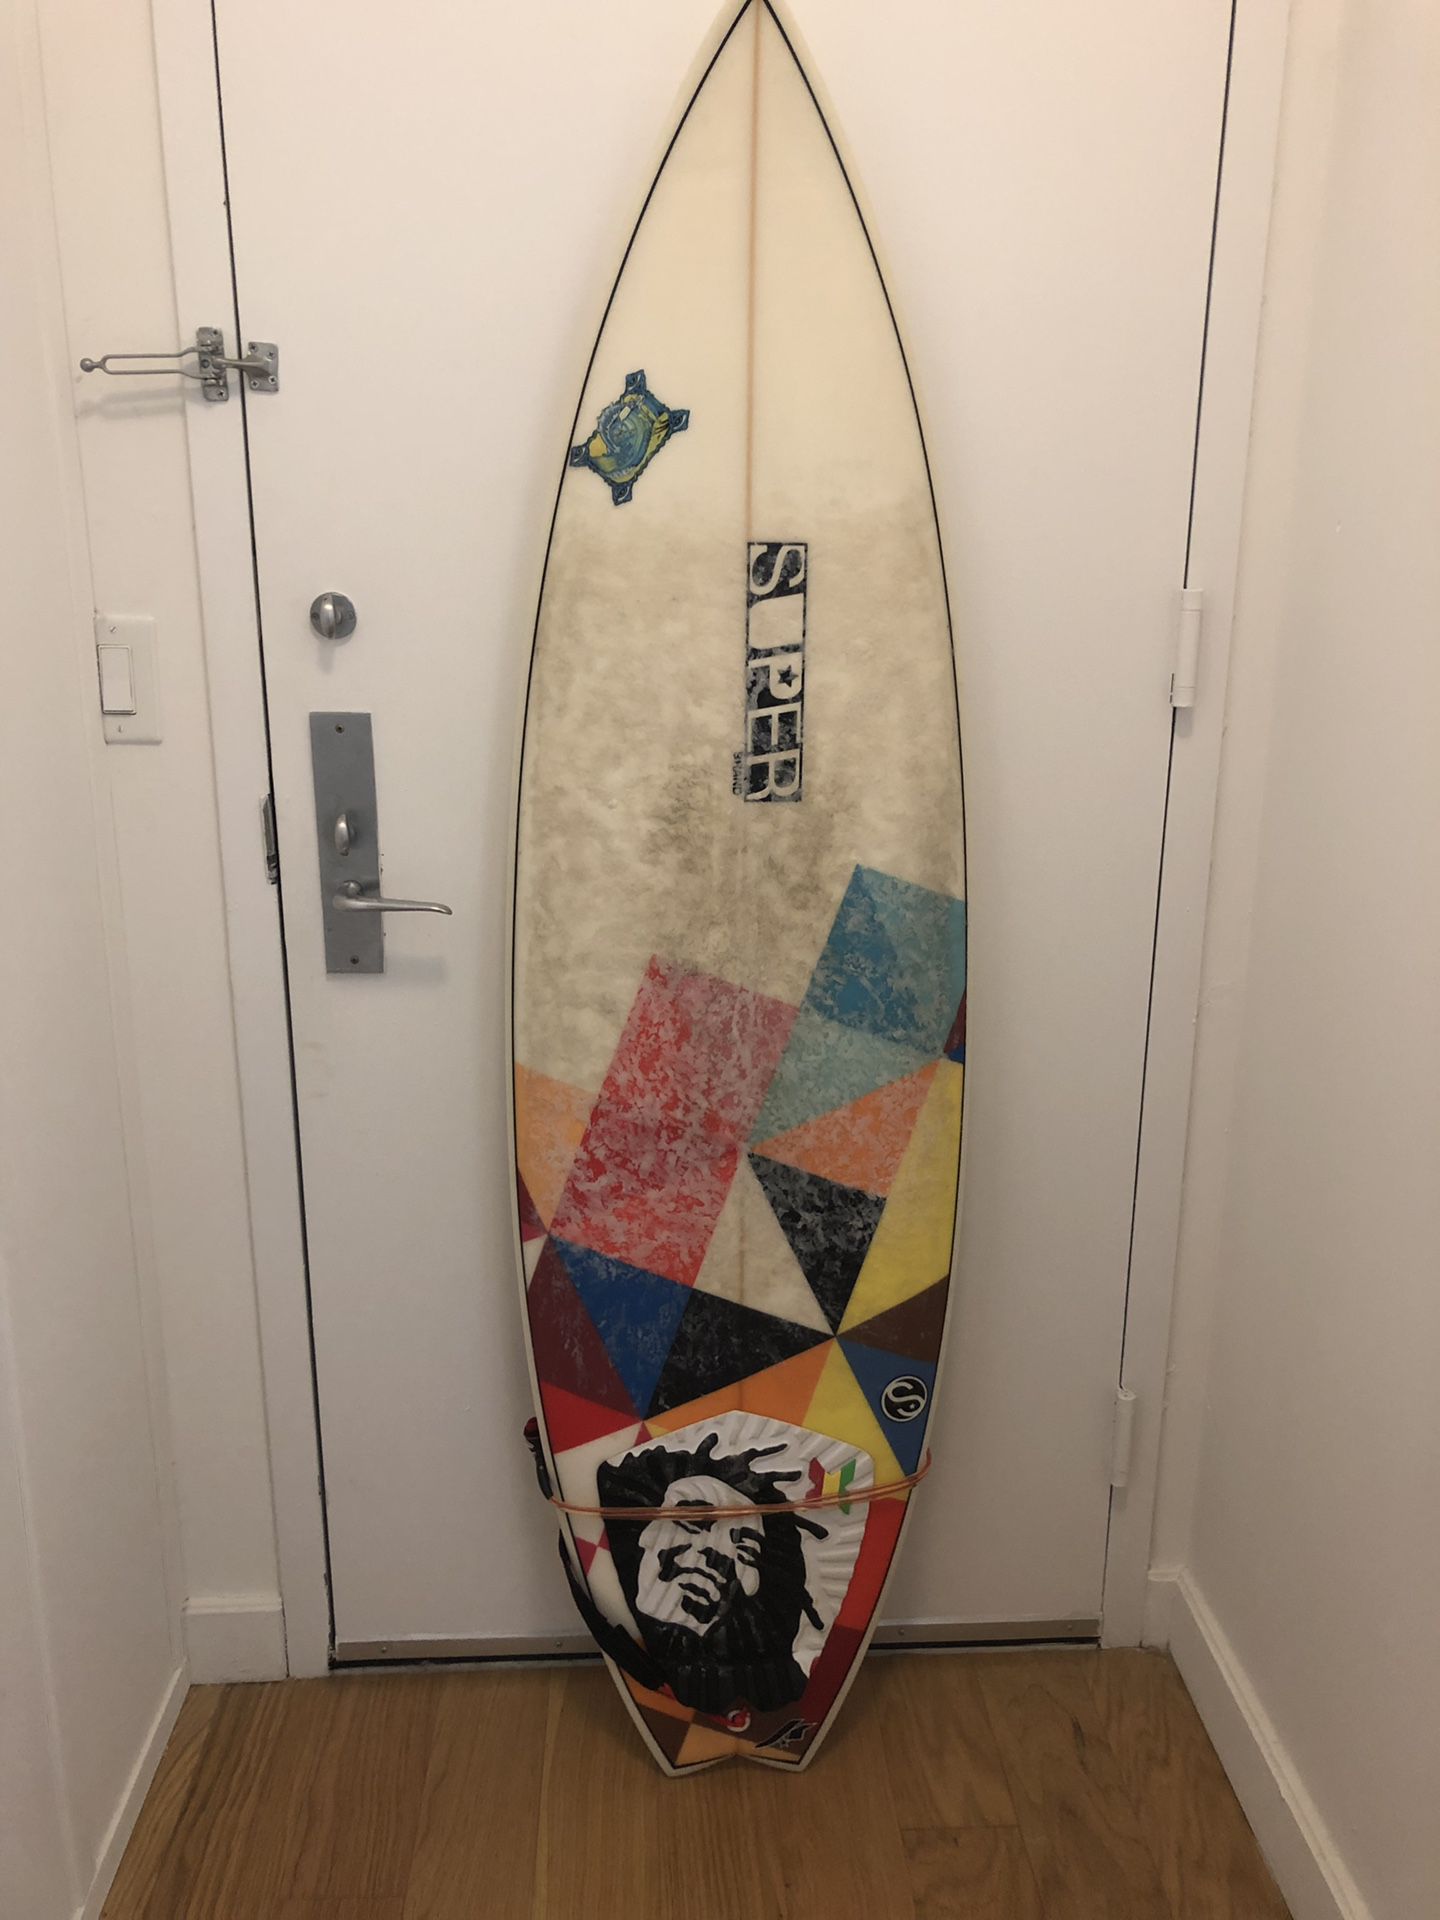 SuperBrand Toy Surfboard 5’10 great condition